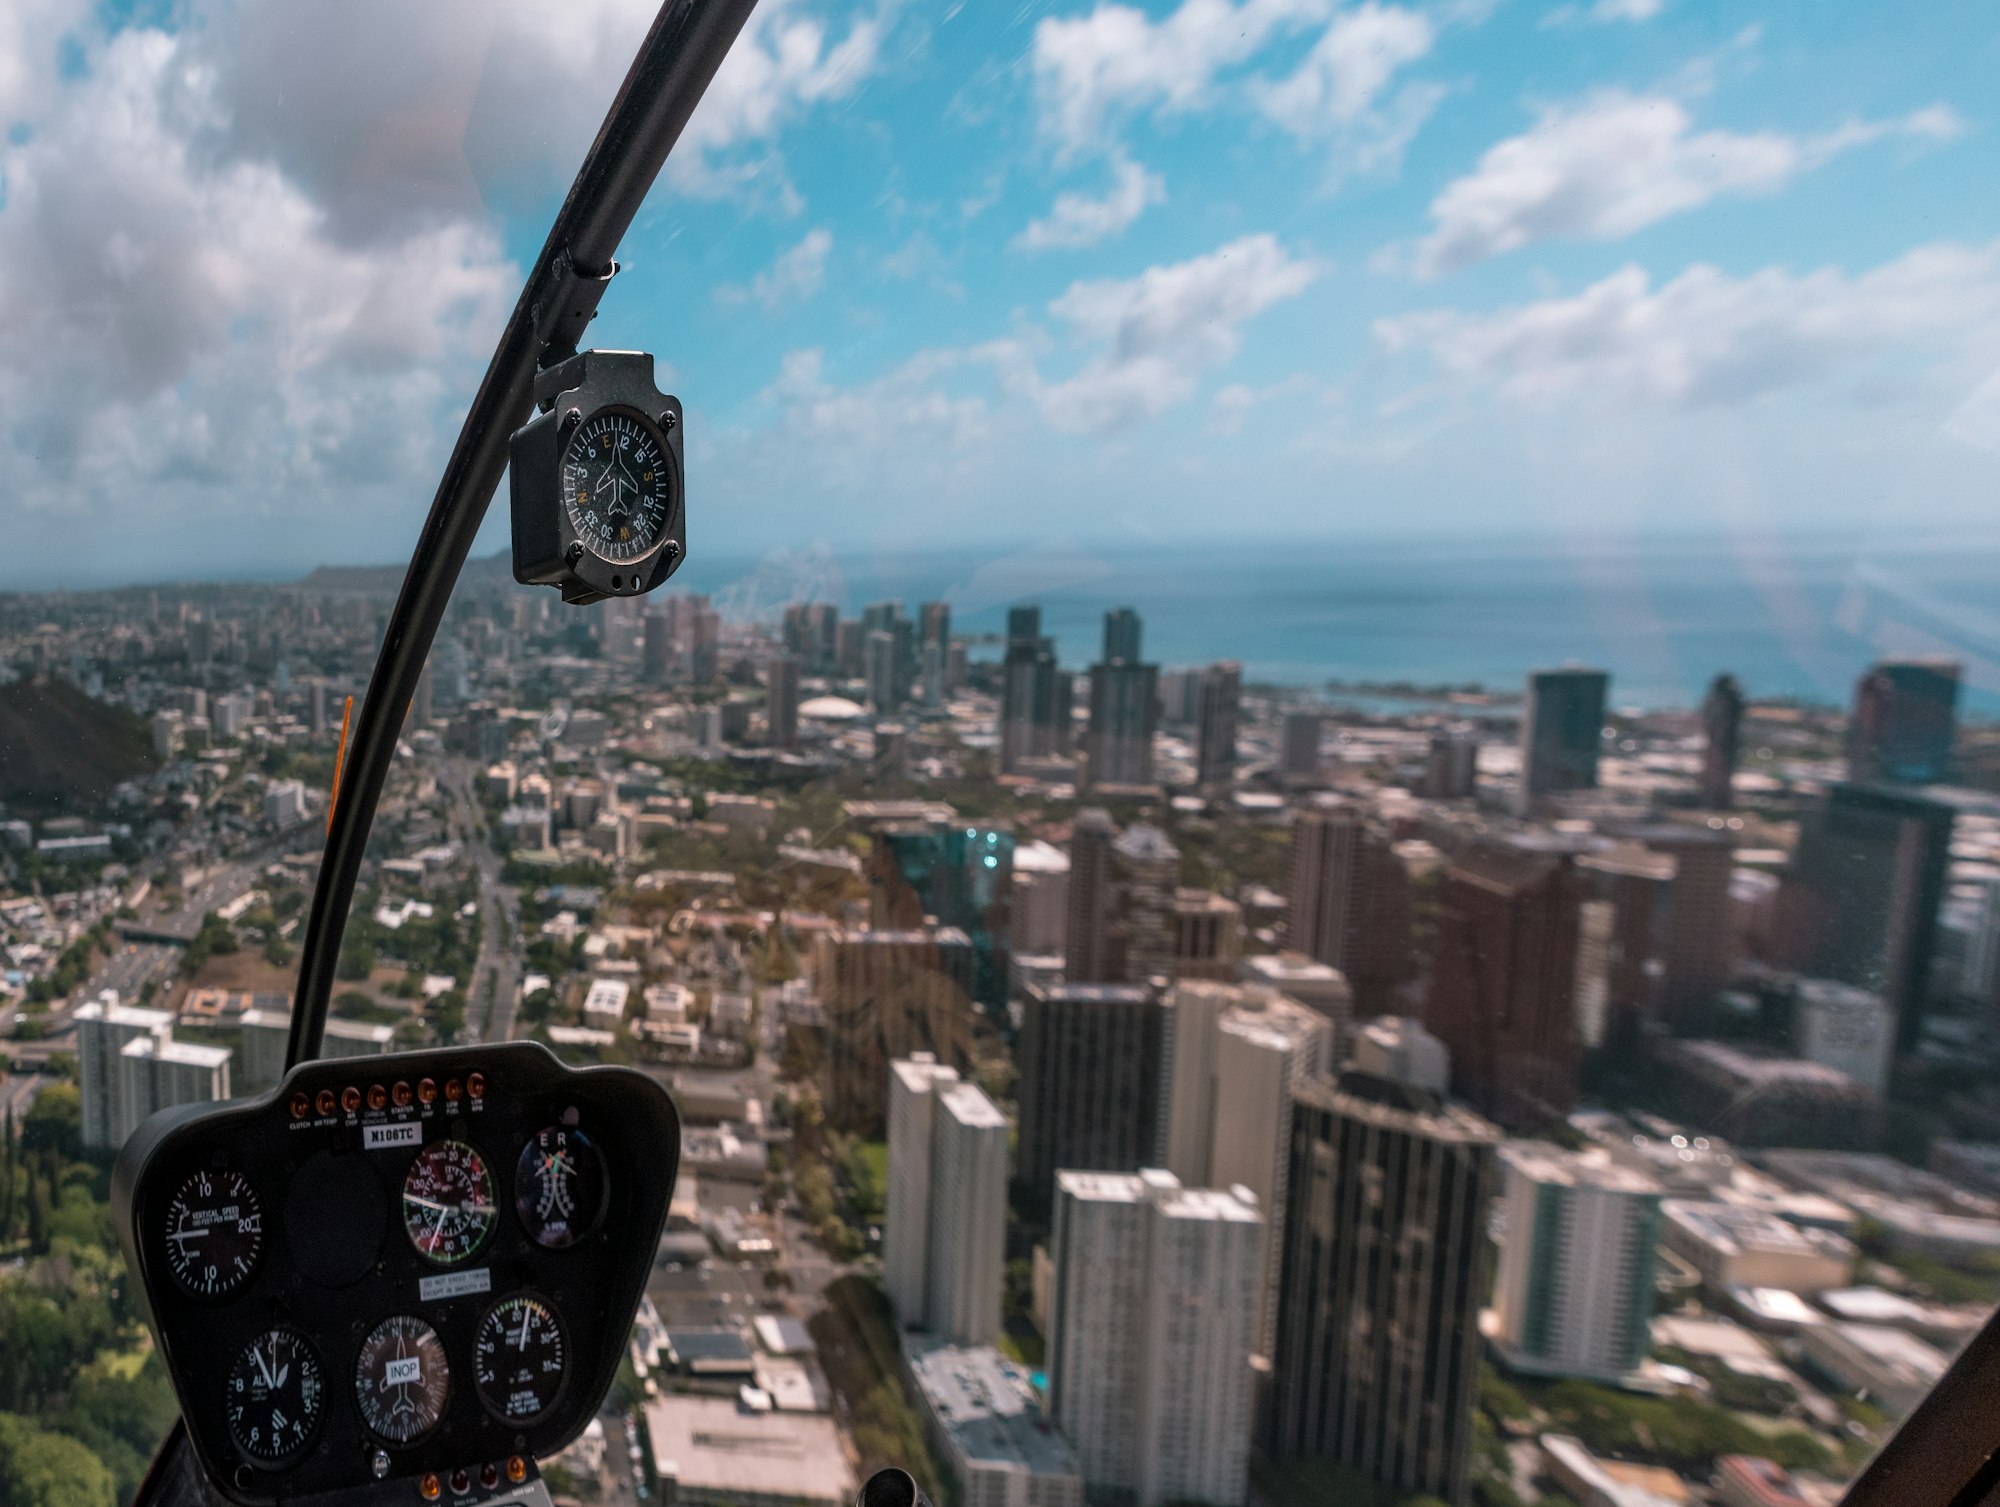 The view from a helicopter over a big city